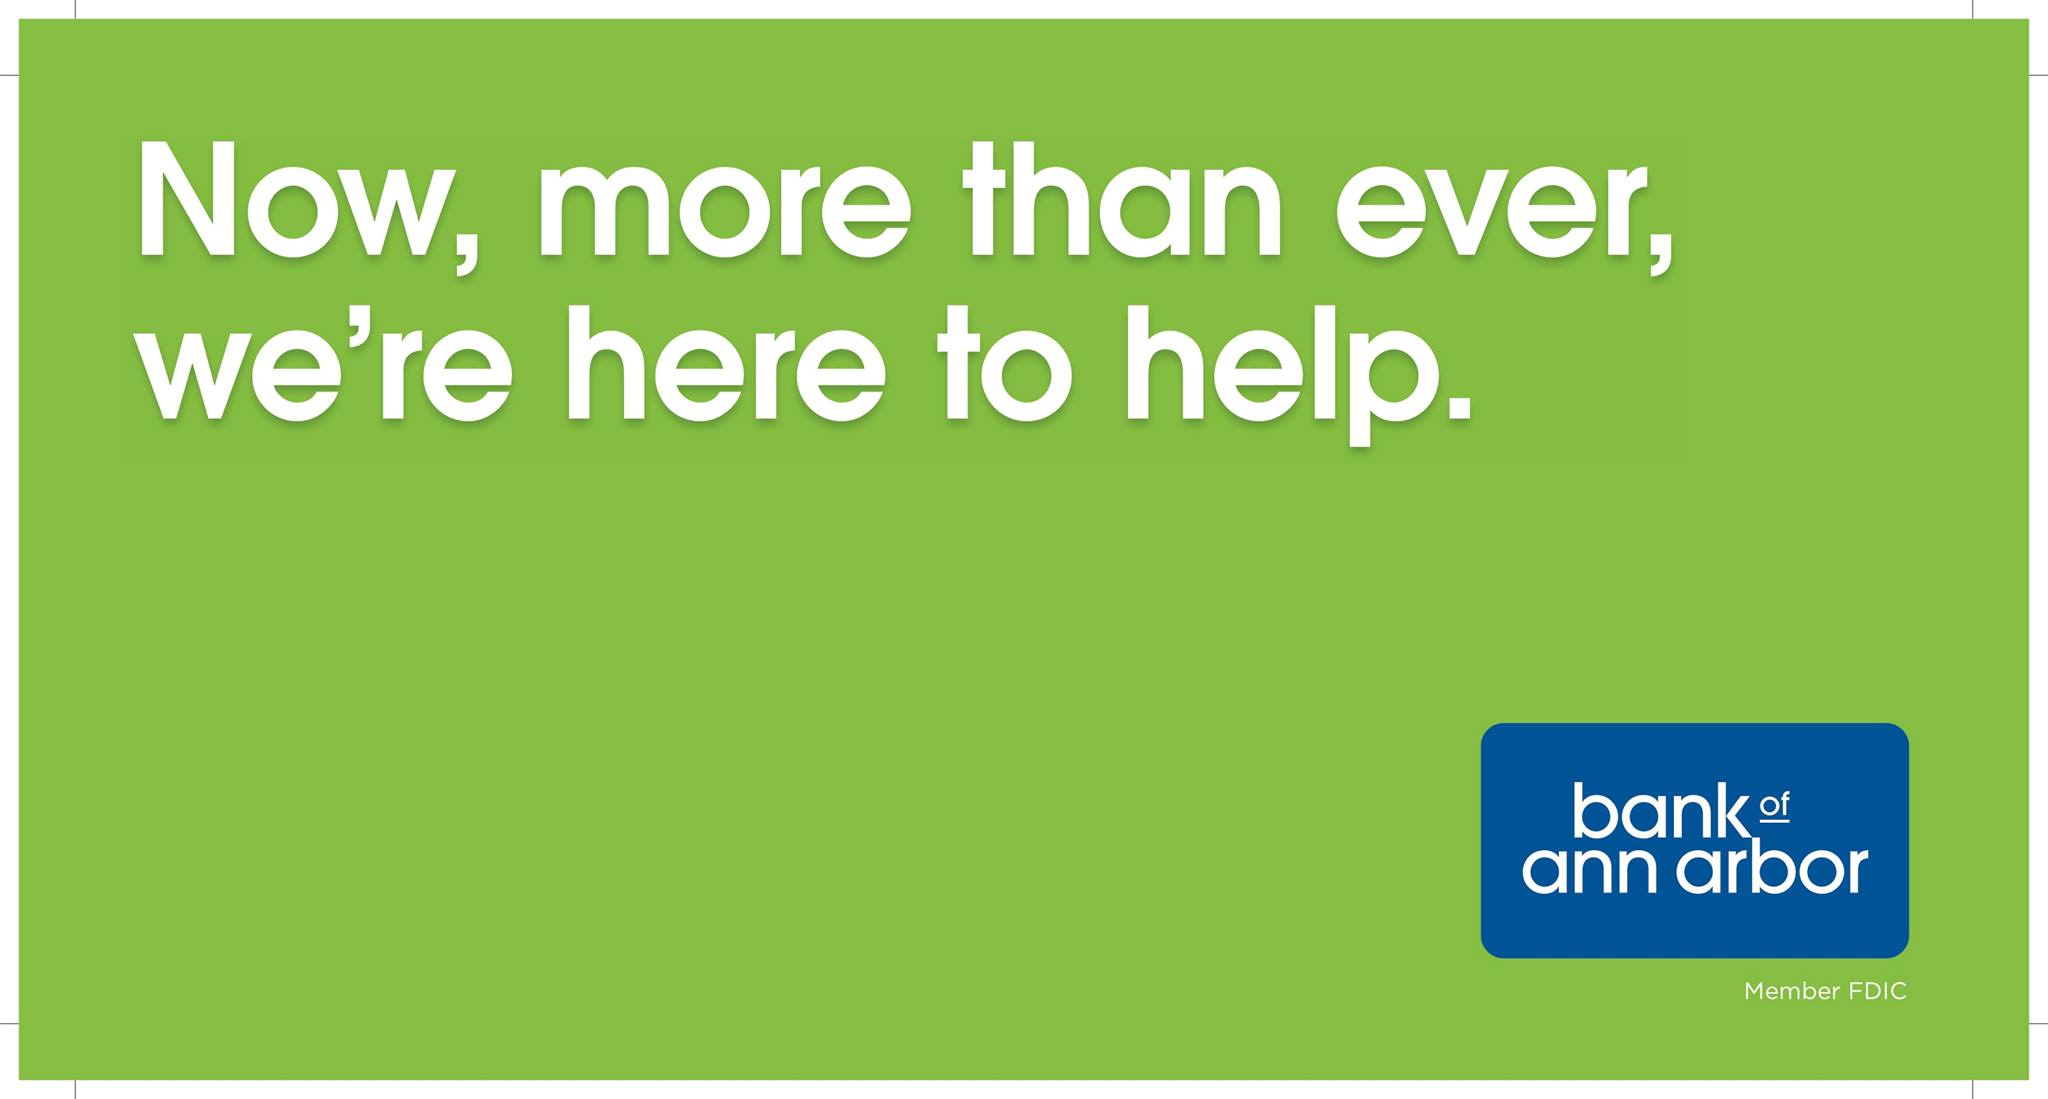 Now, more than ever, we're here to help.